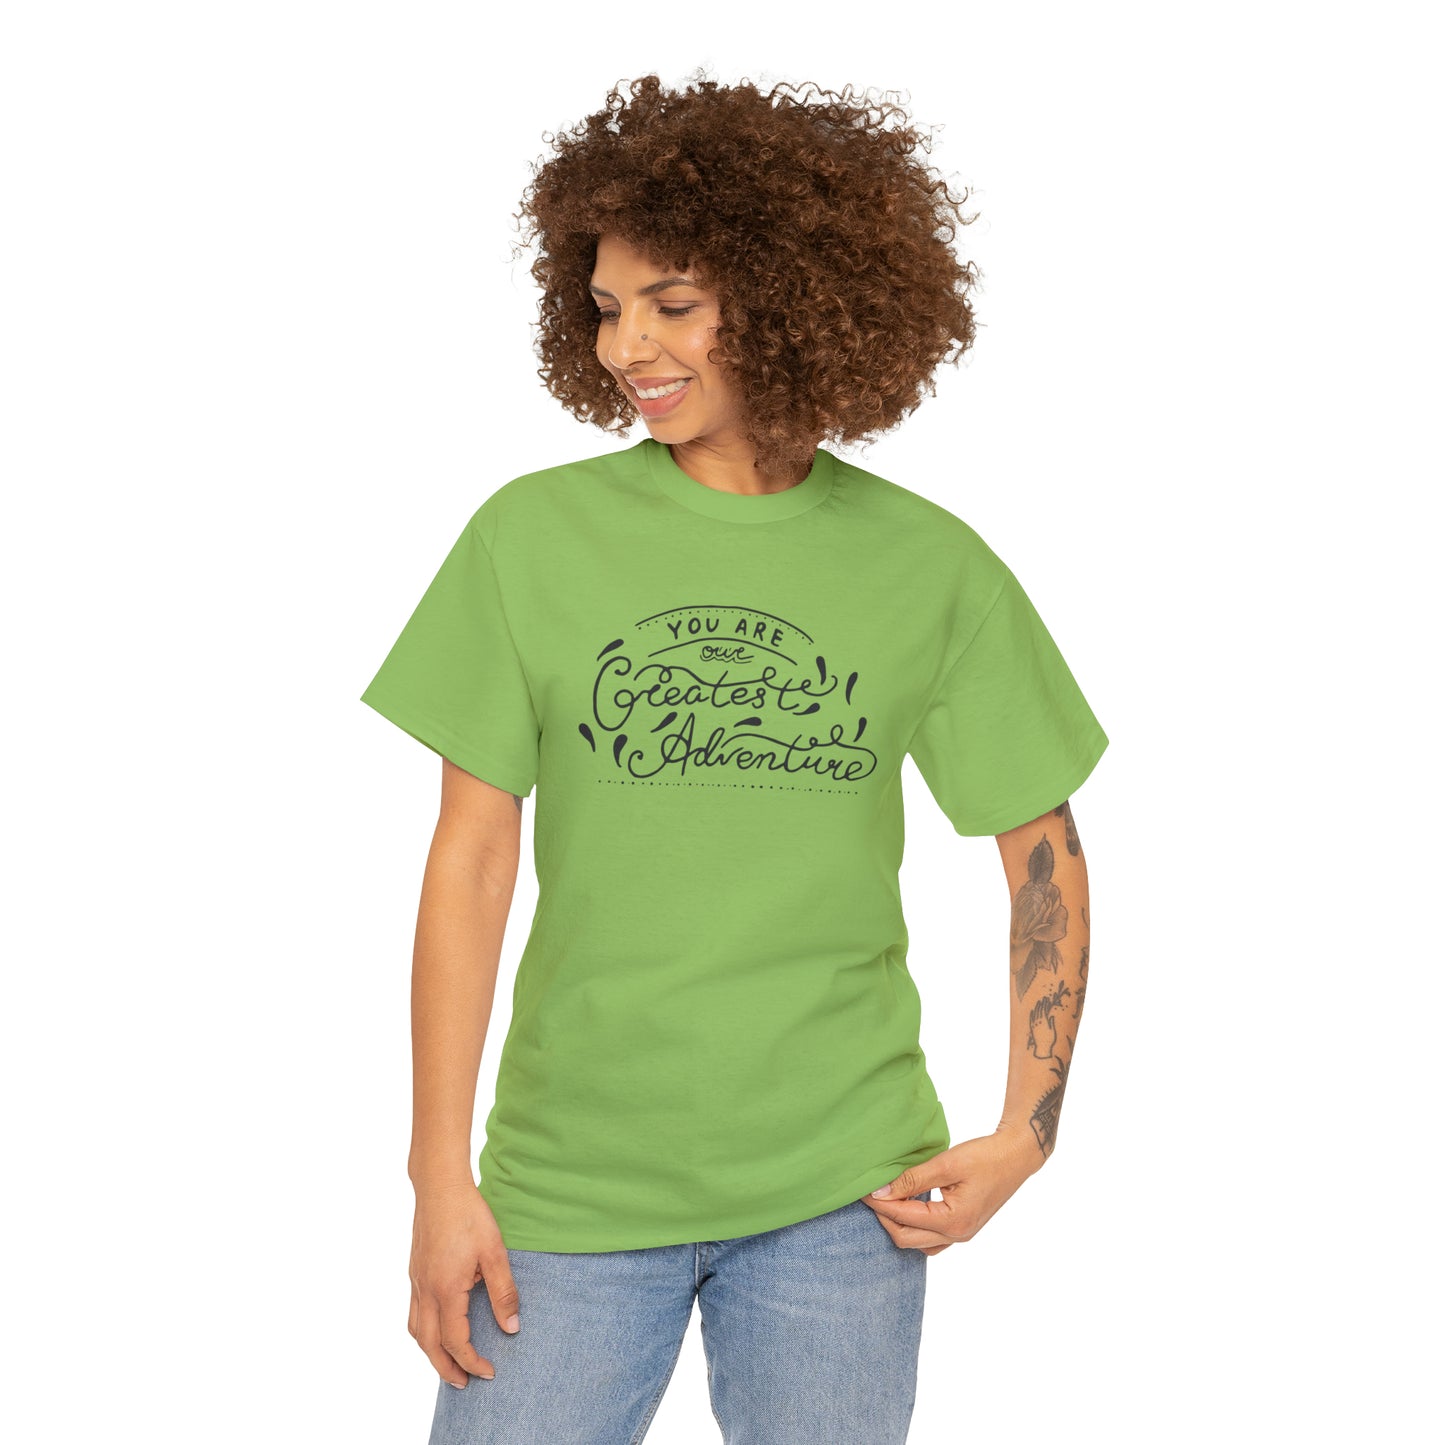 You Are The Greatest Adventure T-Shirt Gift